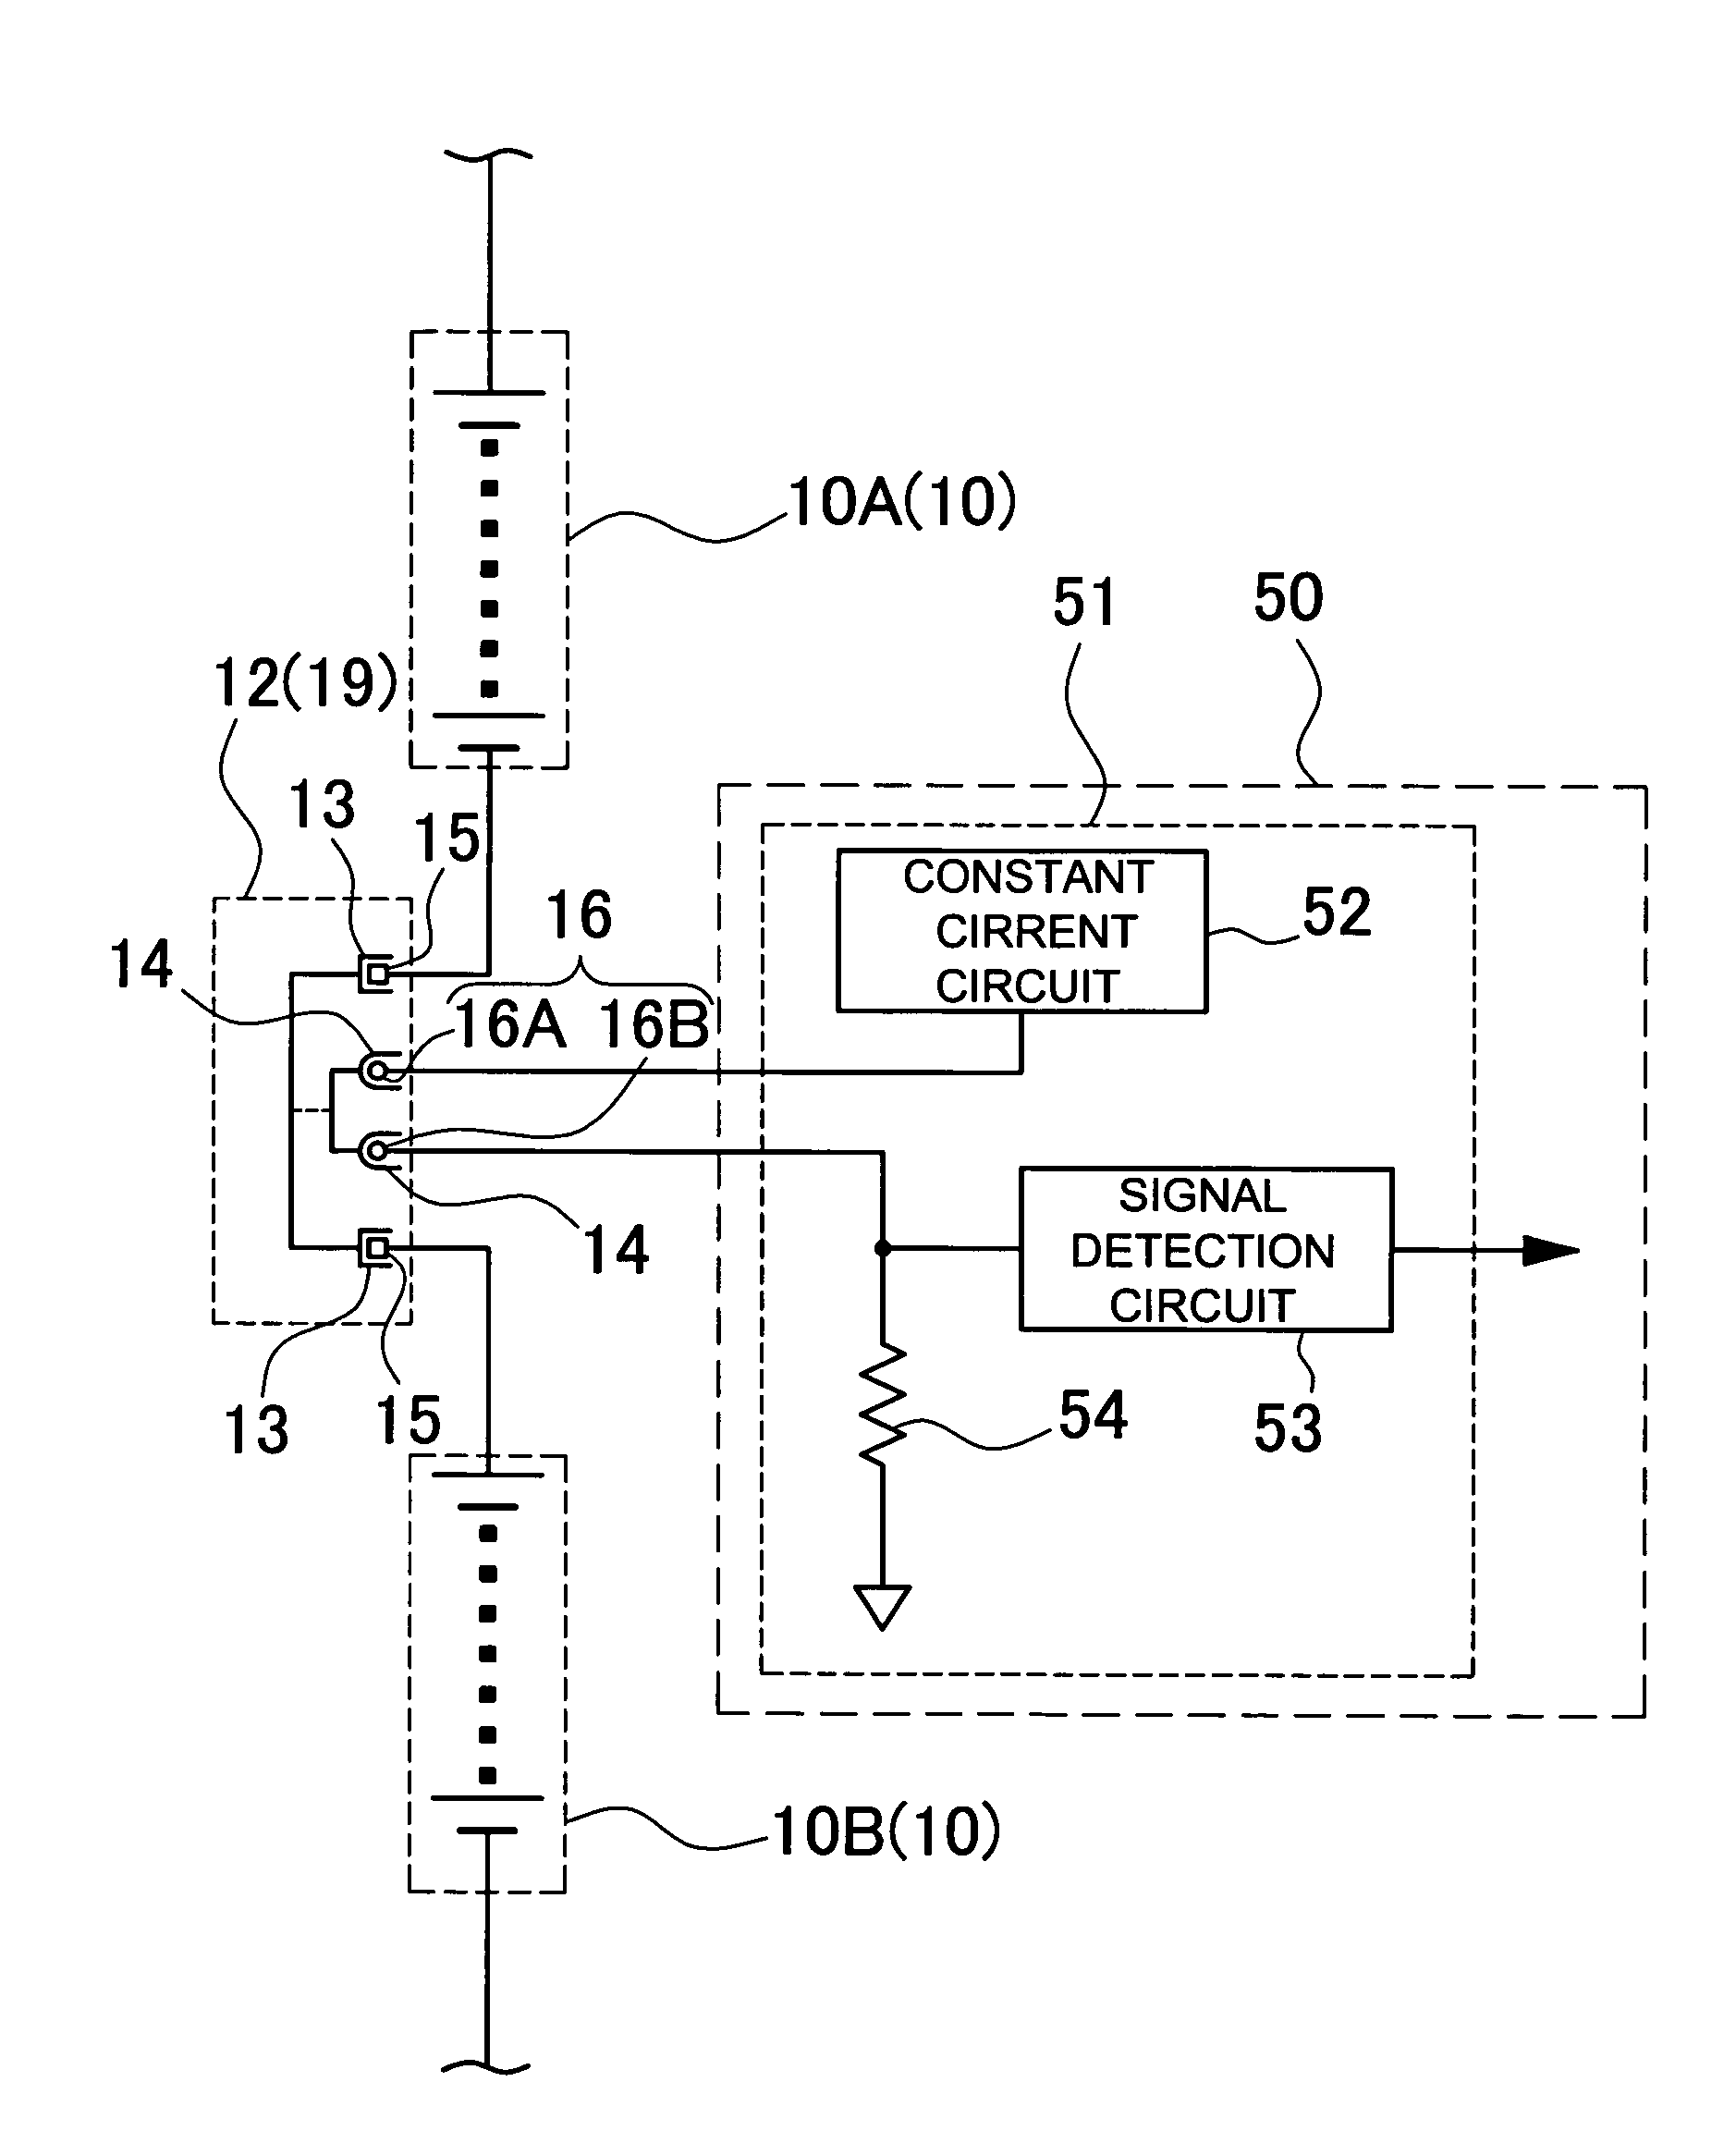 Car power source apparatus including removable cut-off mechanism to stop equalizing batteries